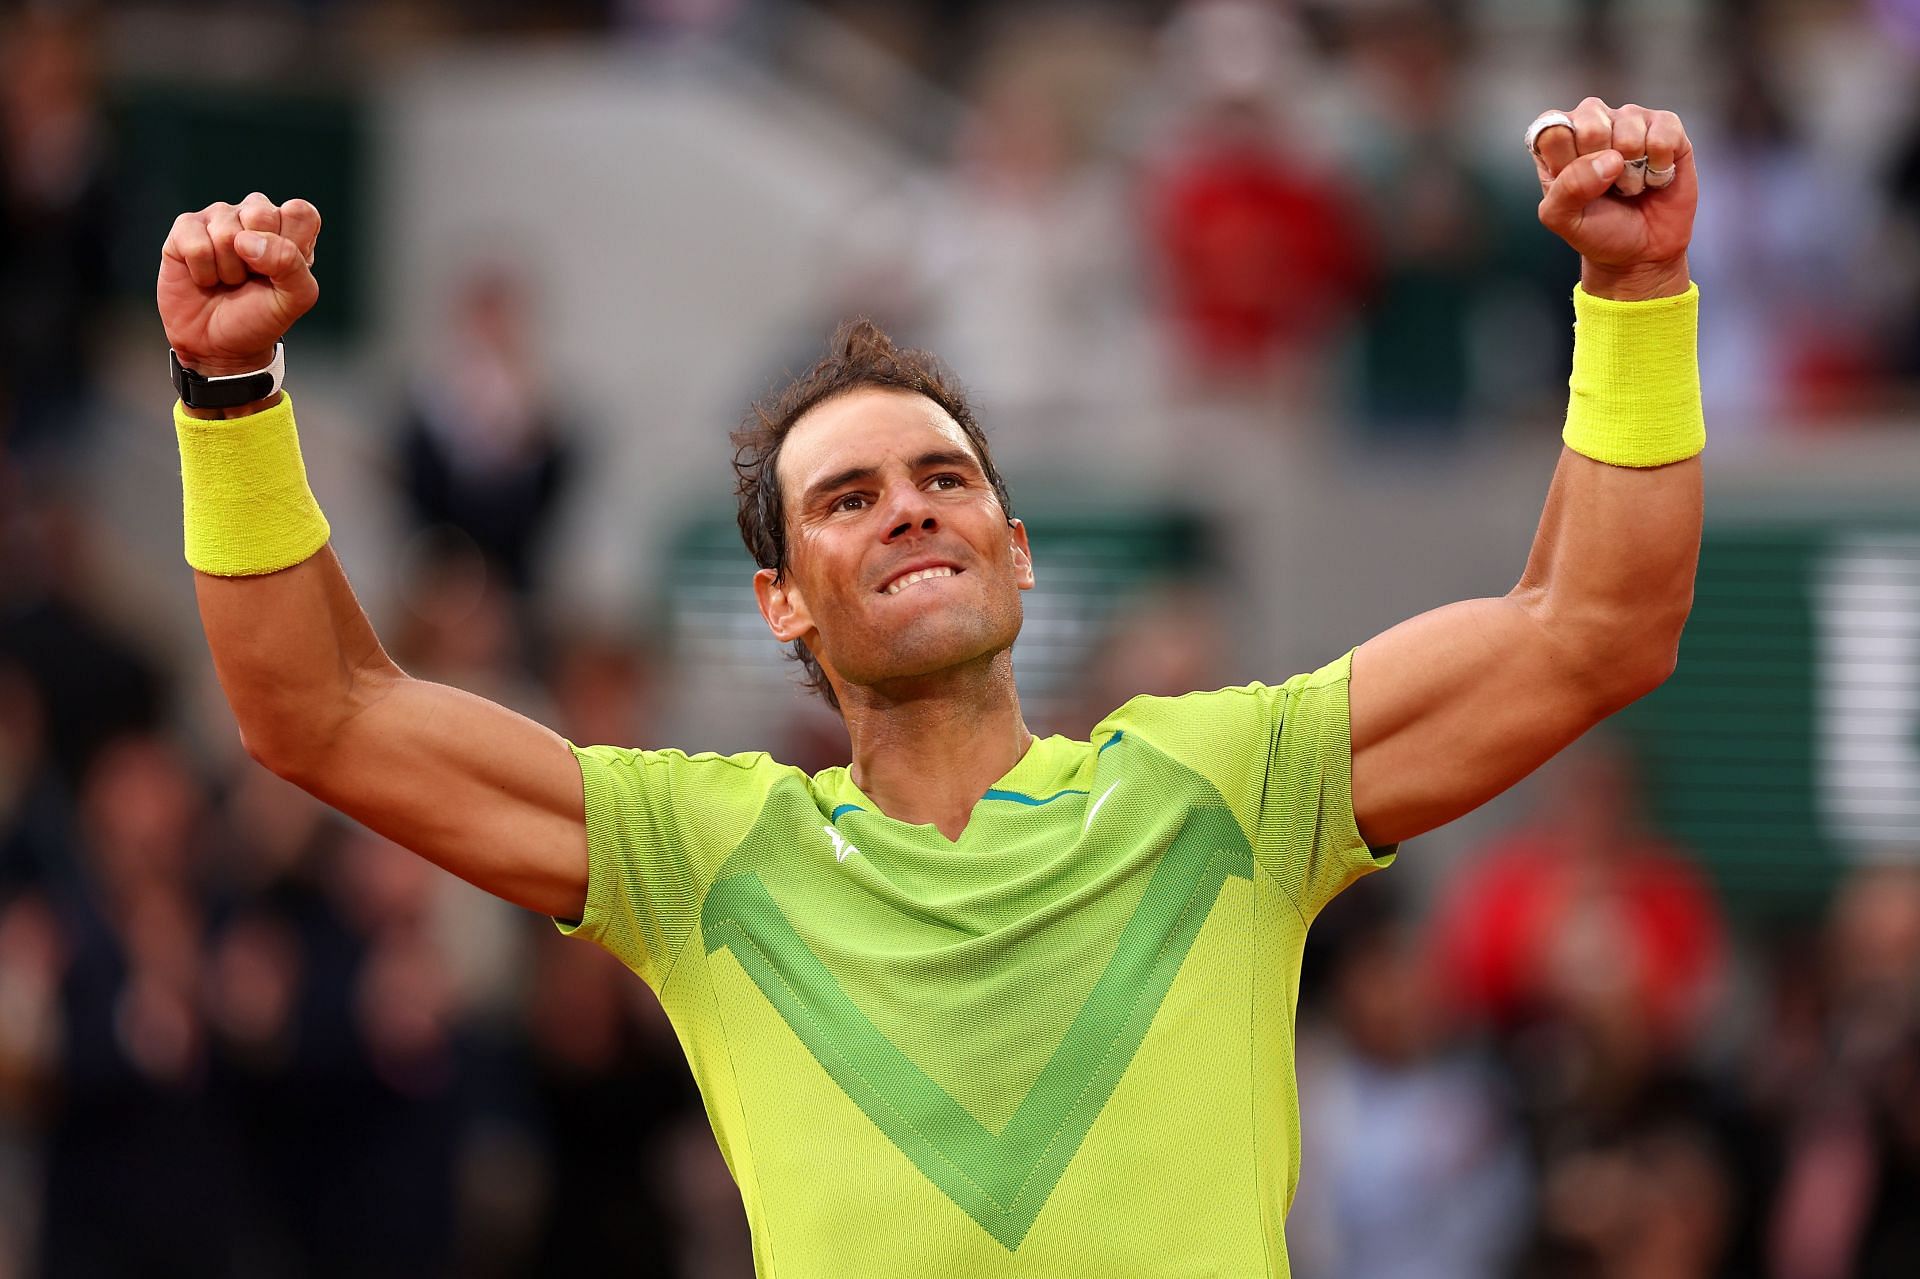 Rafael Nadal won his 22nd Grand Slam at the 2022 French Open